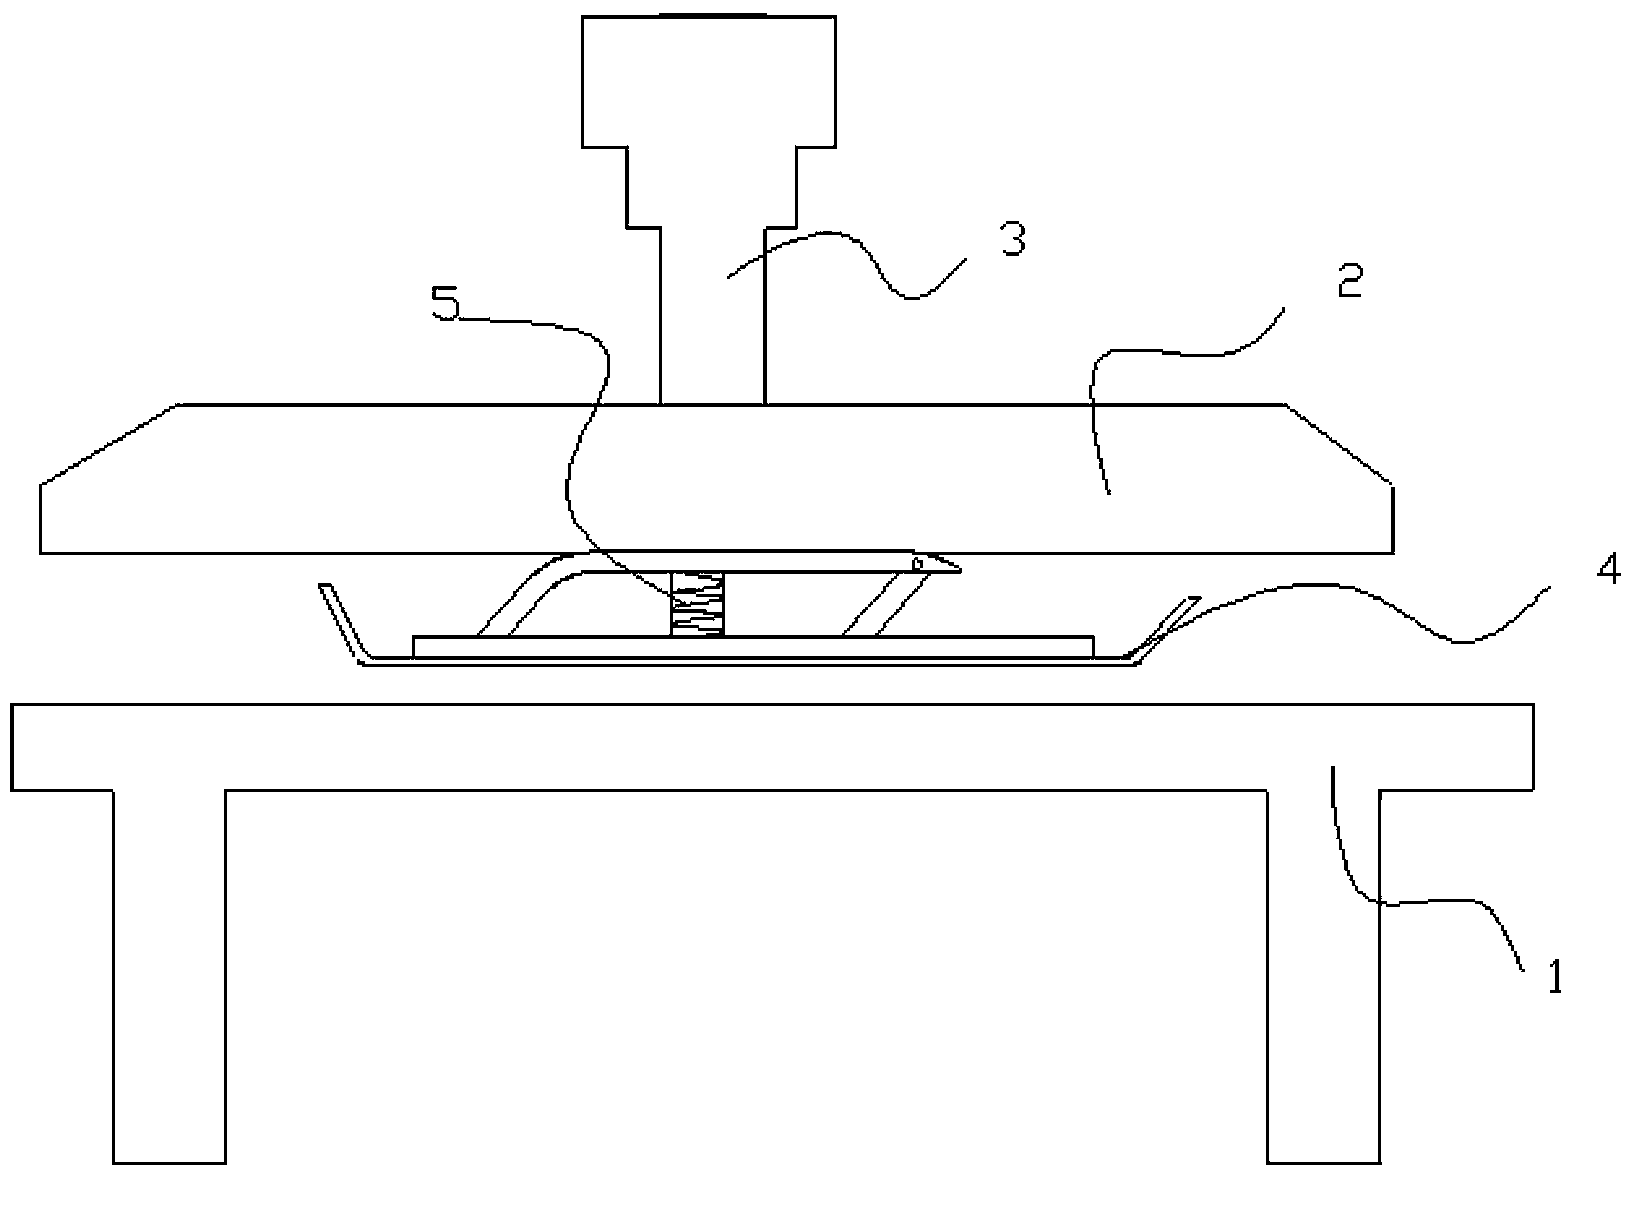 Paper board forming grinding device